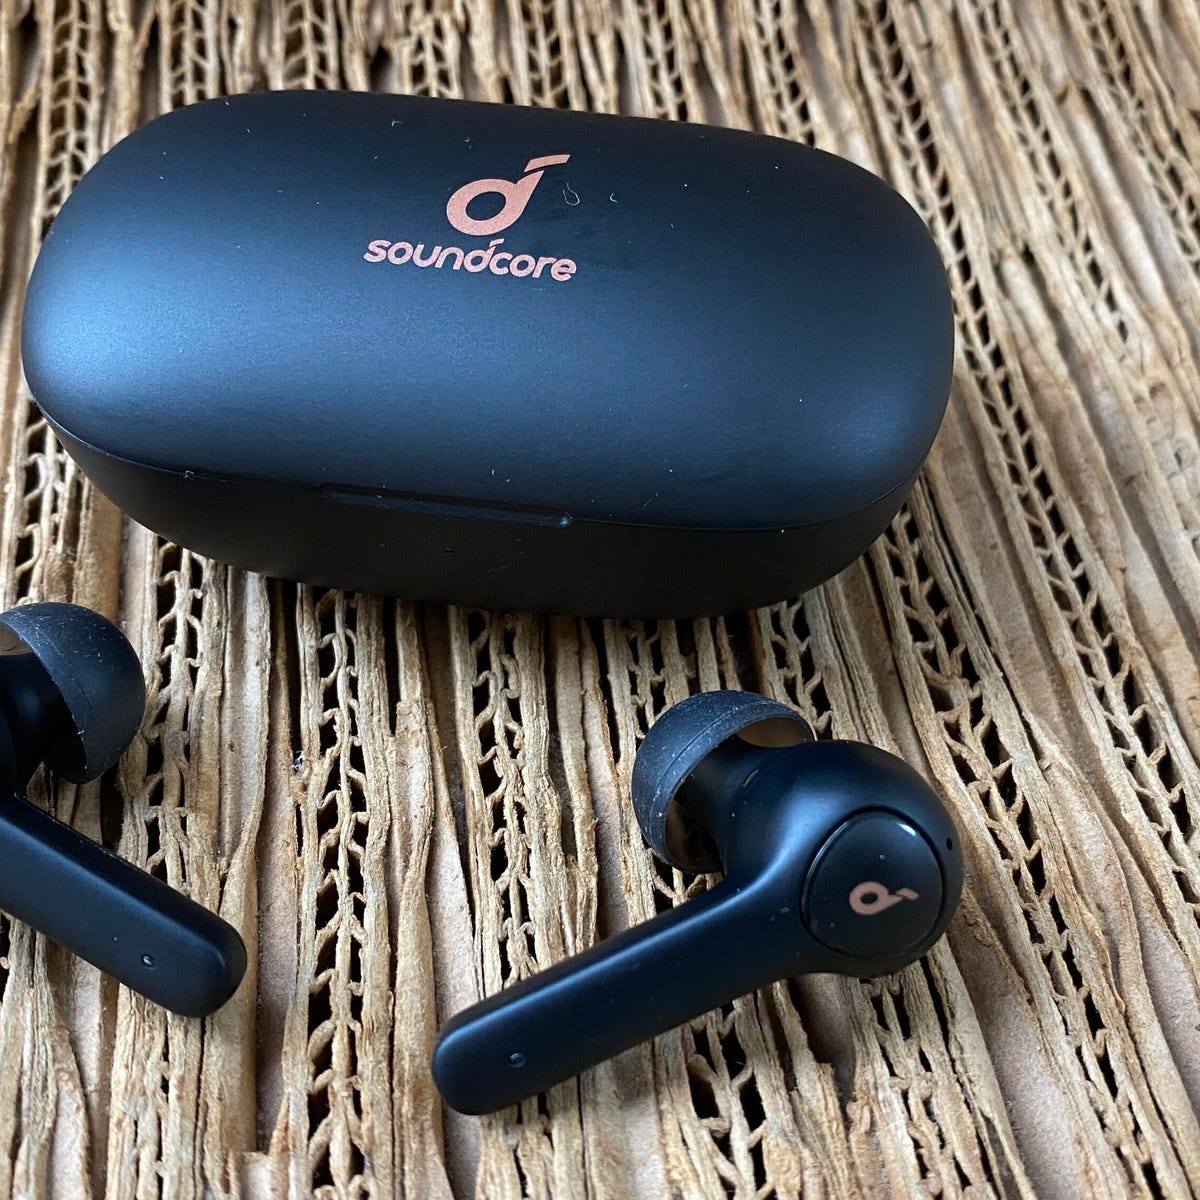 Anker Soundcore Life P2 review: The company's best true wireless